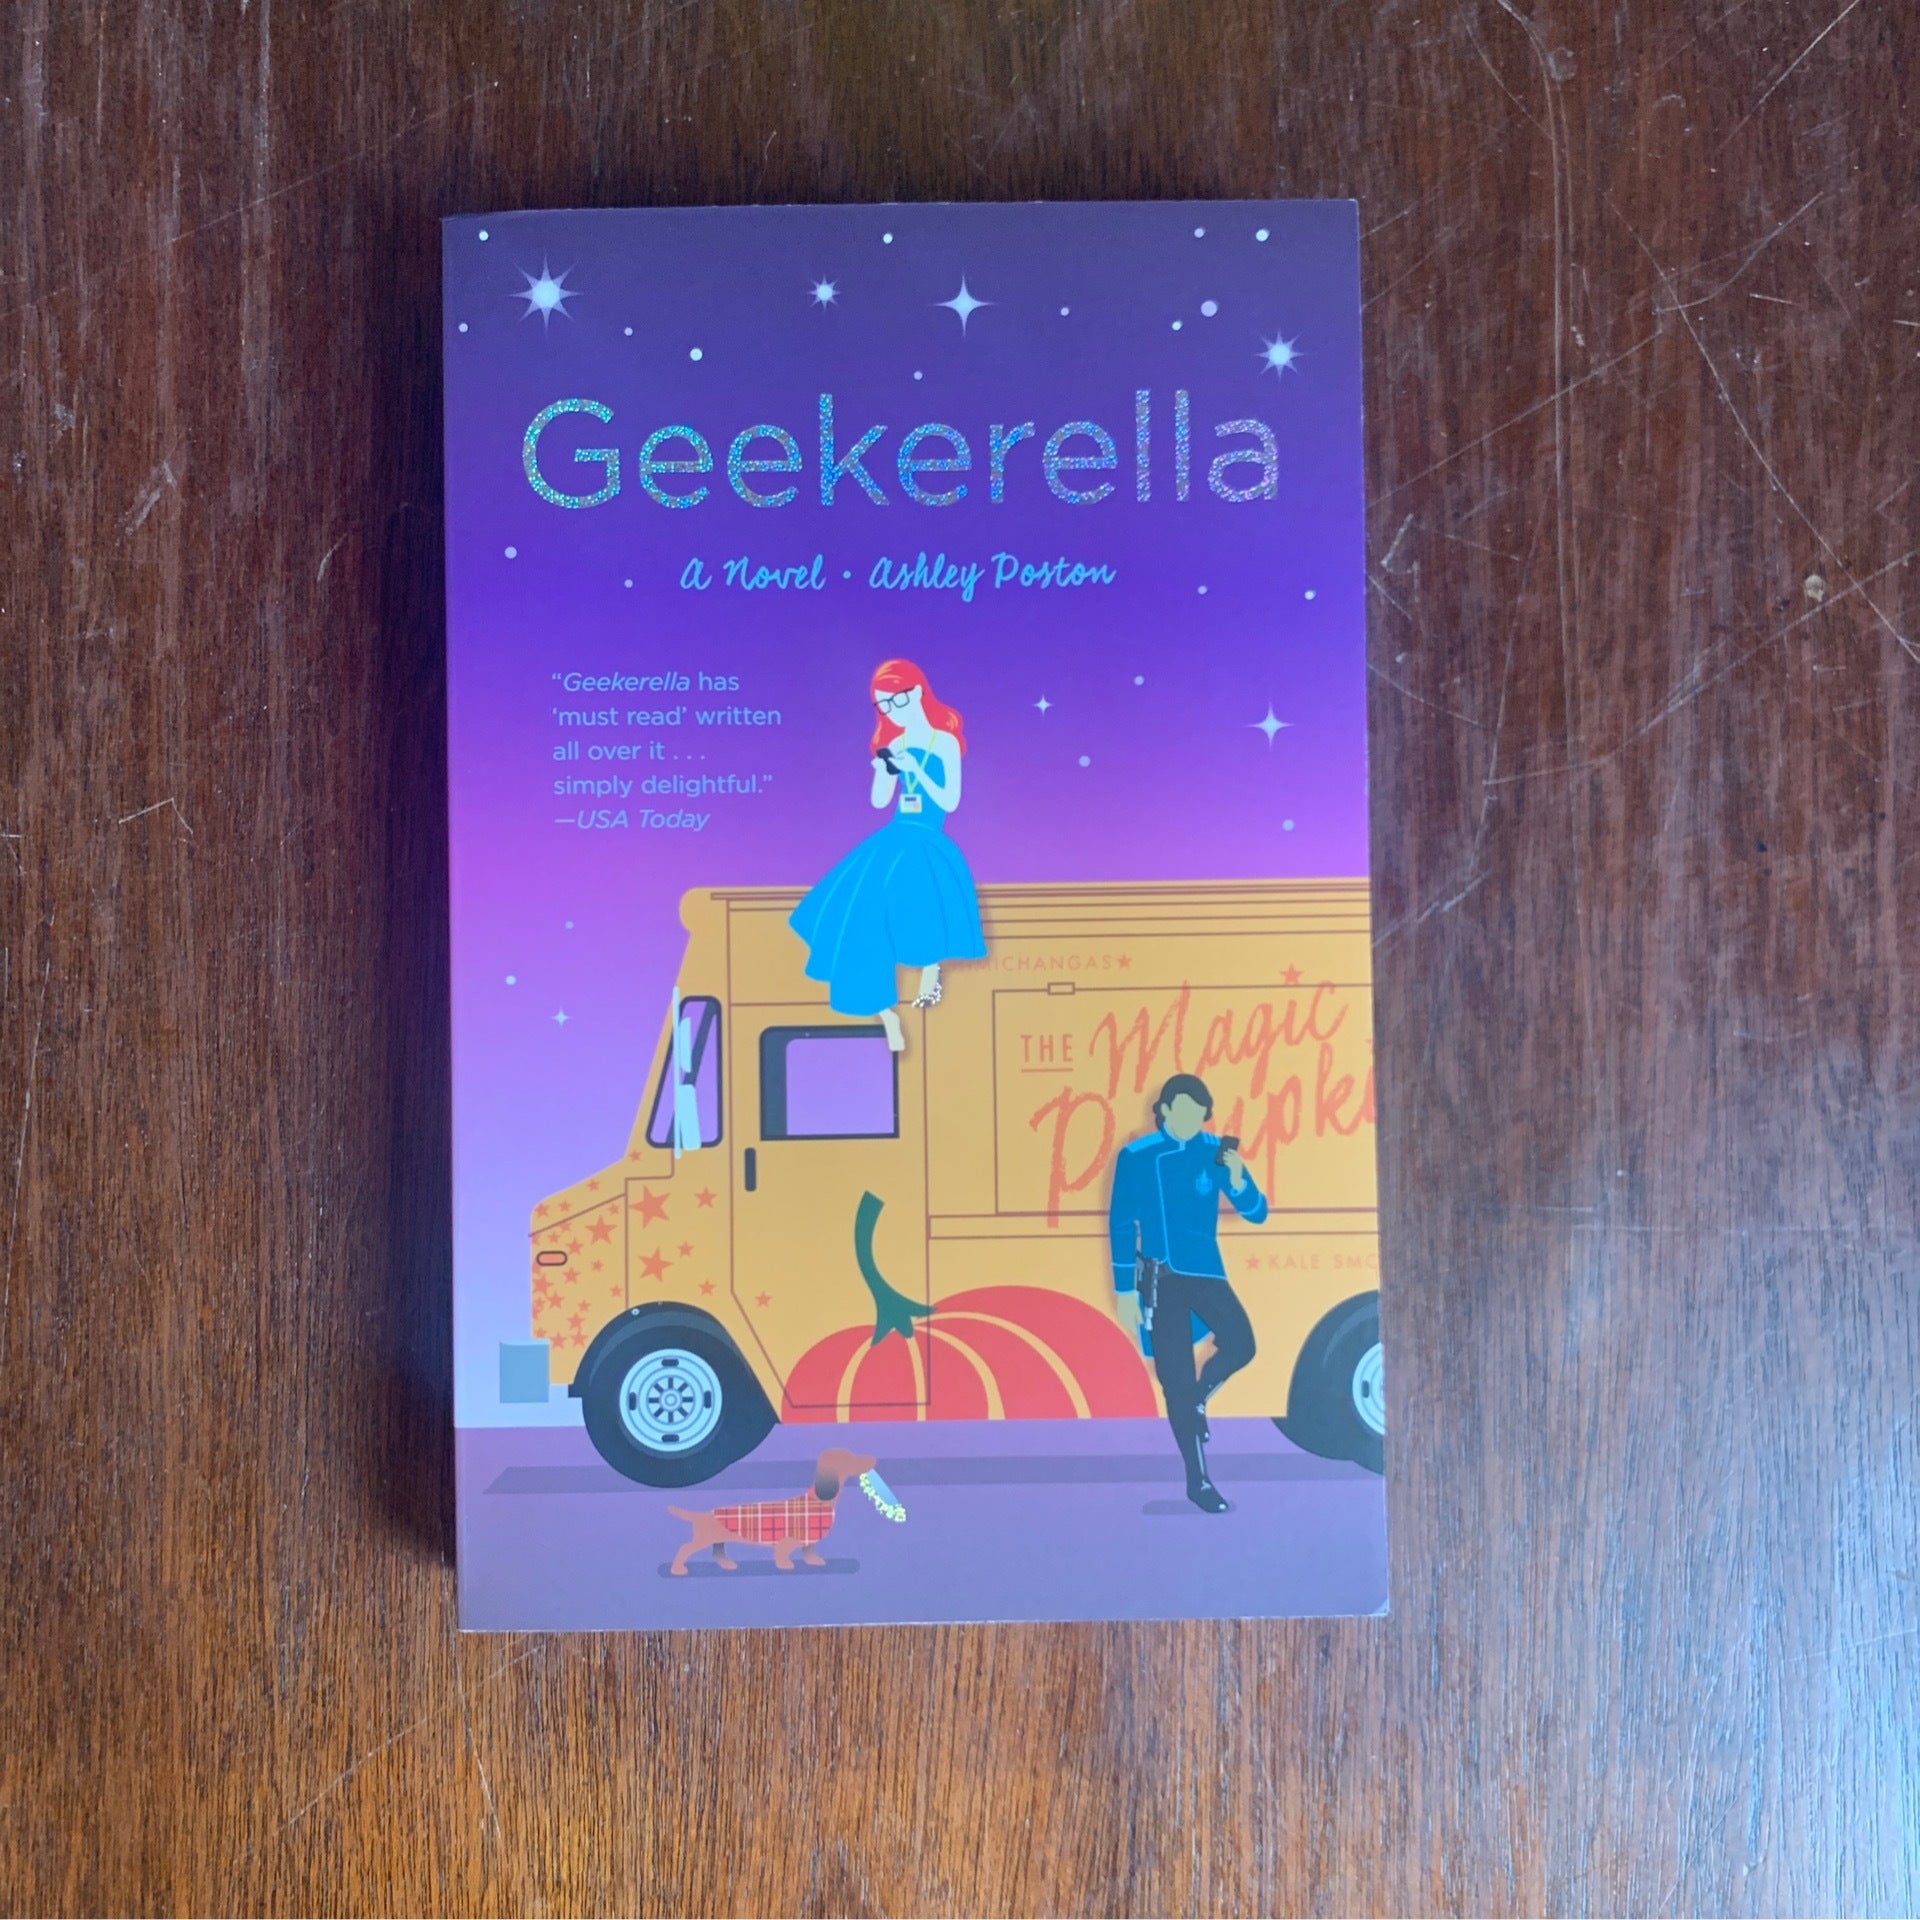  Geekerella: A Fangirl Fairy Tale (Once Upon A Con